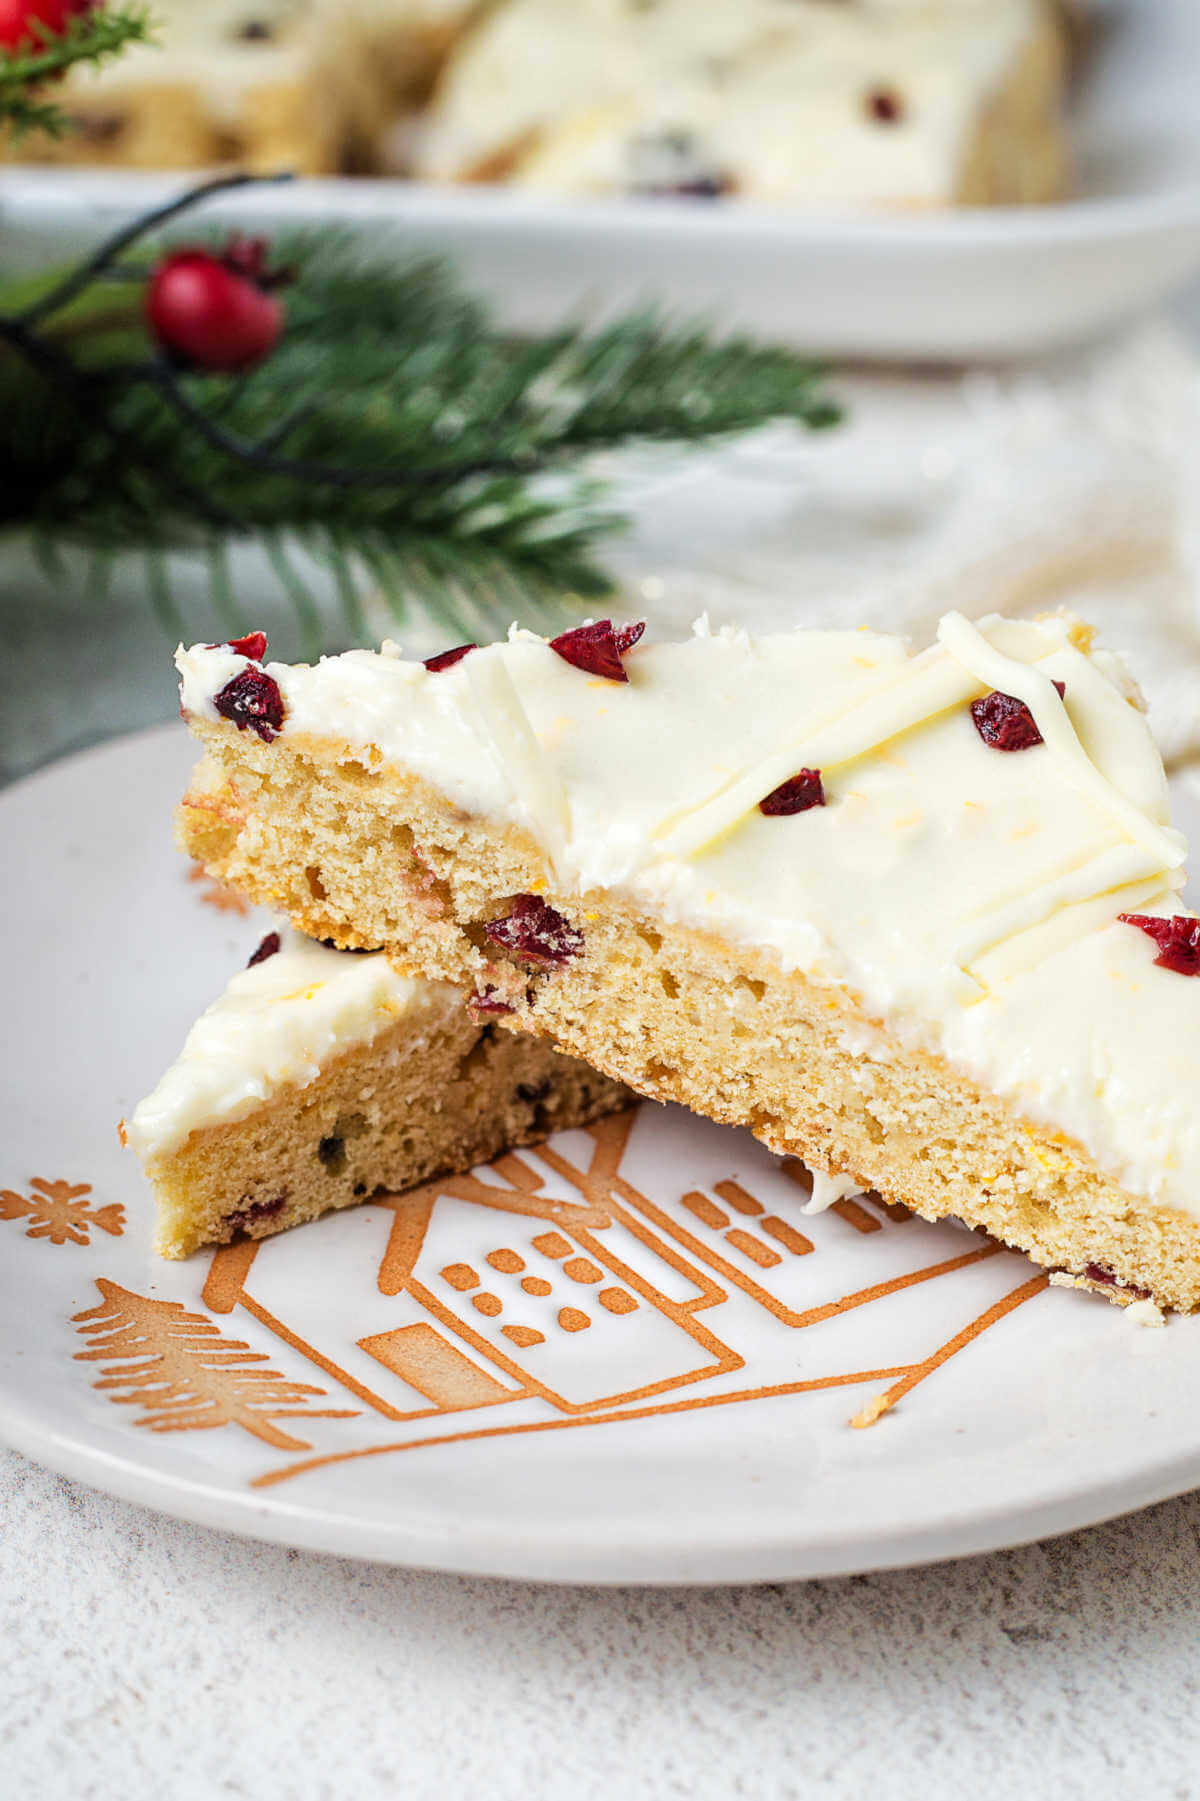 two cranberry bliss bars on a holiday serving plate on a table with Christmas decor.